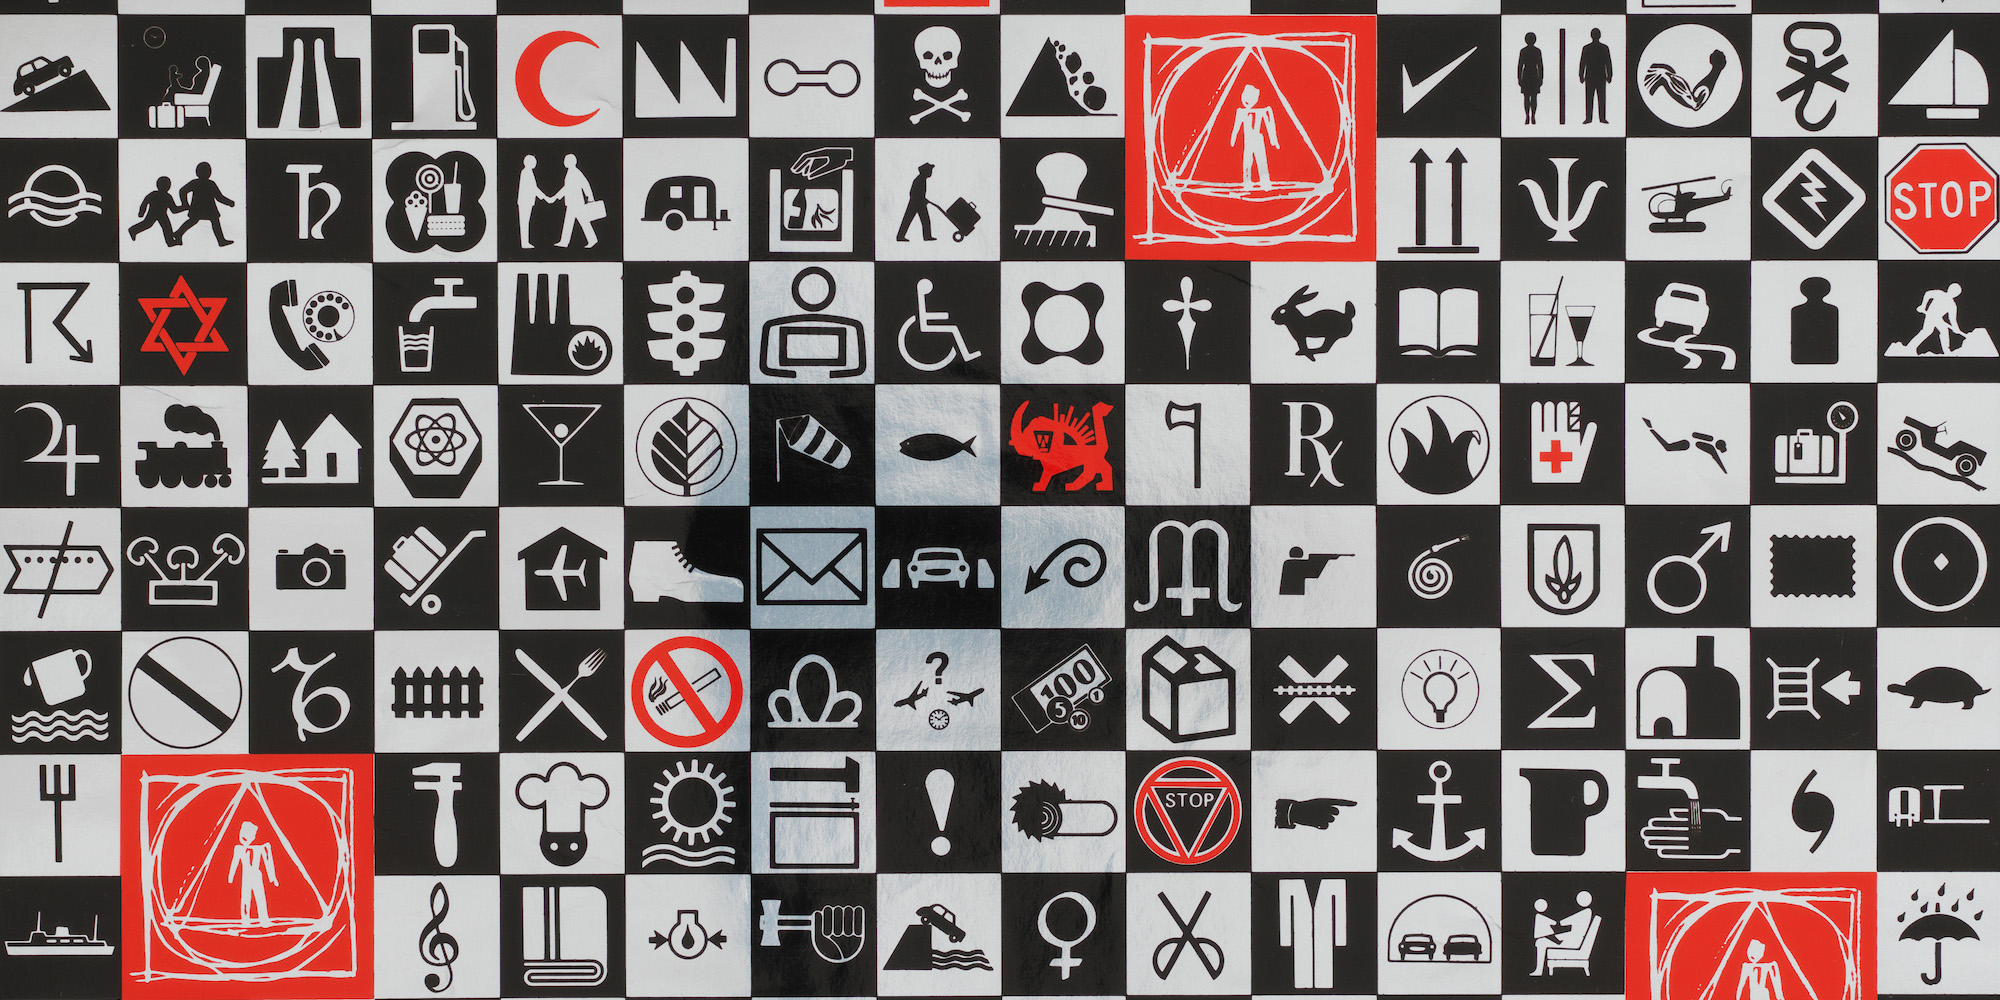 Grid of various symbols appearing largely in black and white, with a few symbols marked in red.